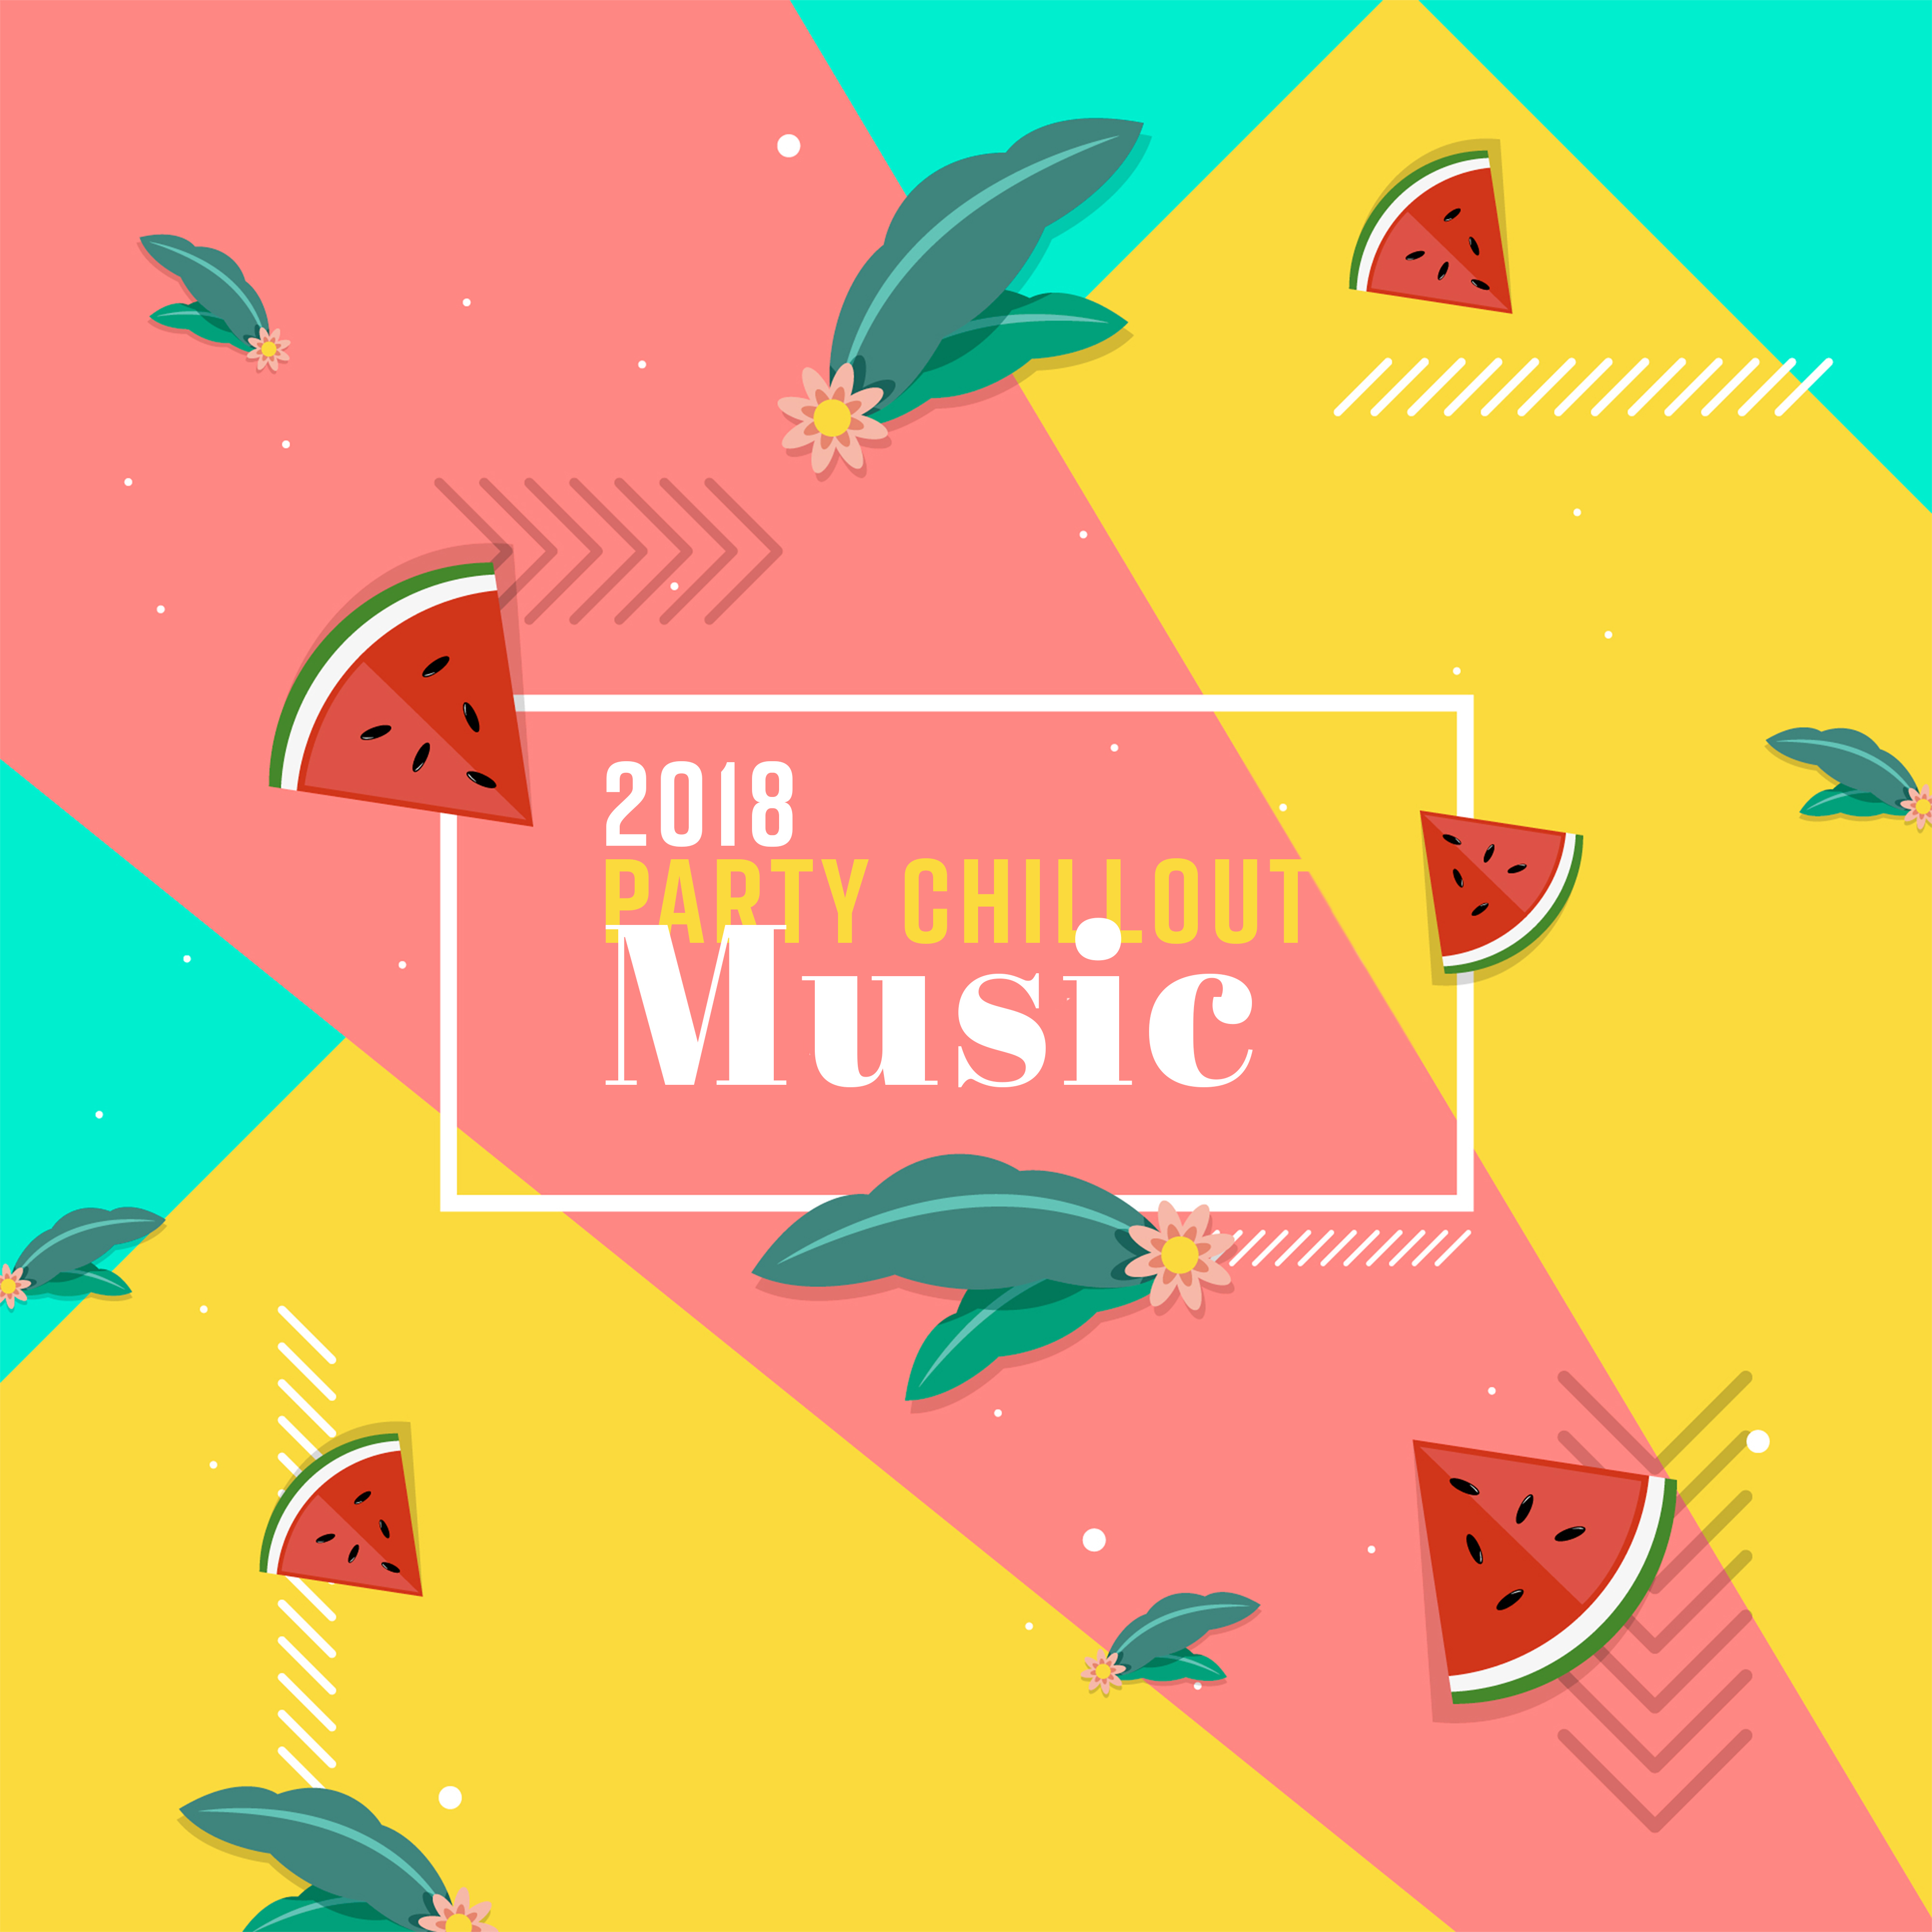 2018 Party Chillout Music